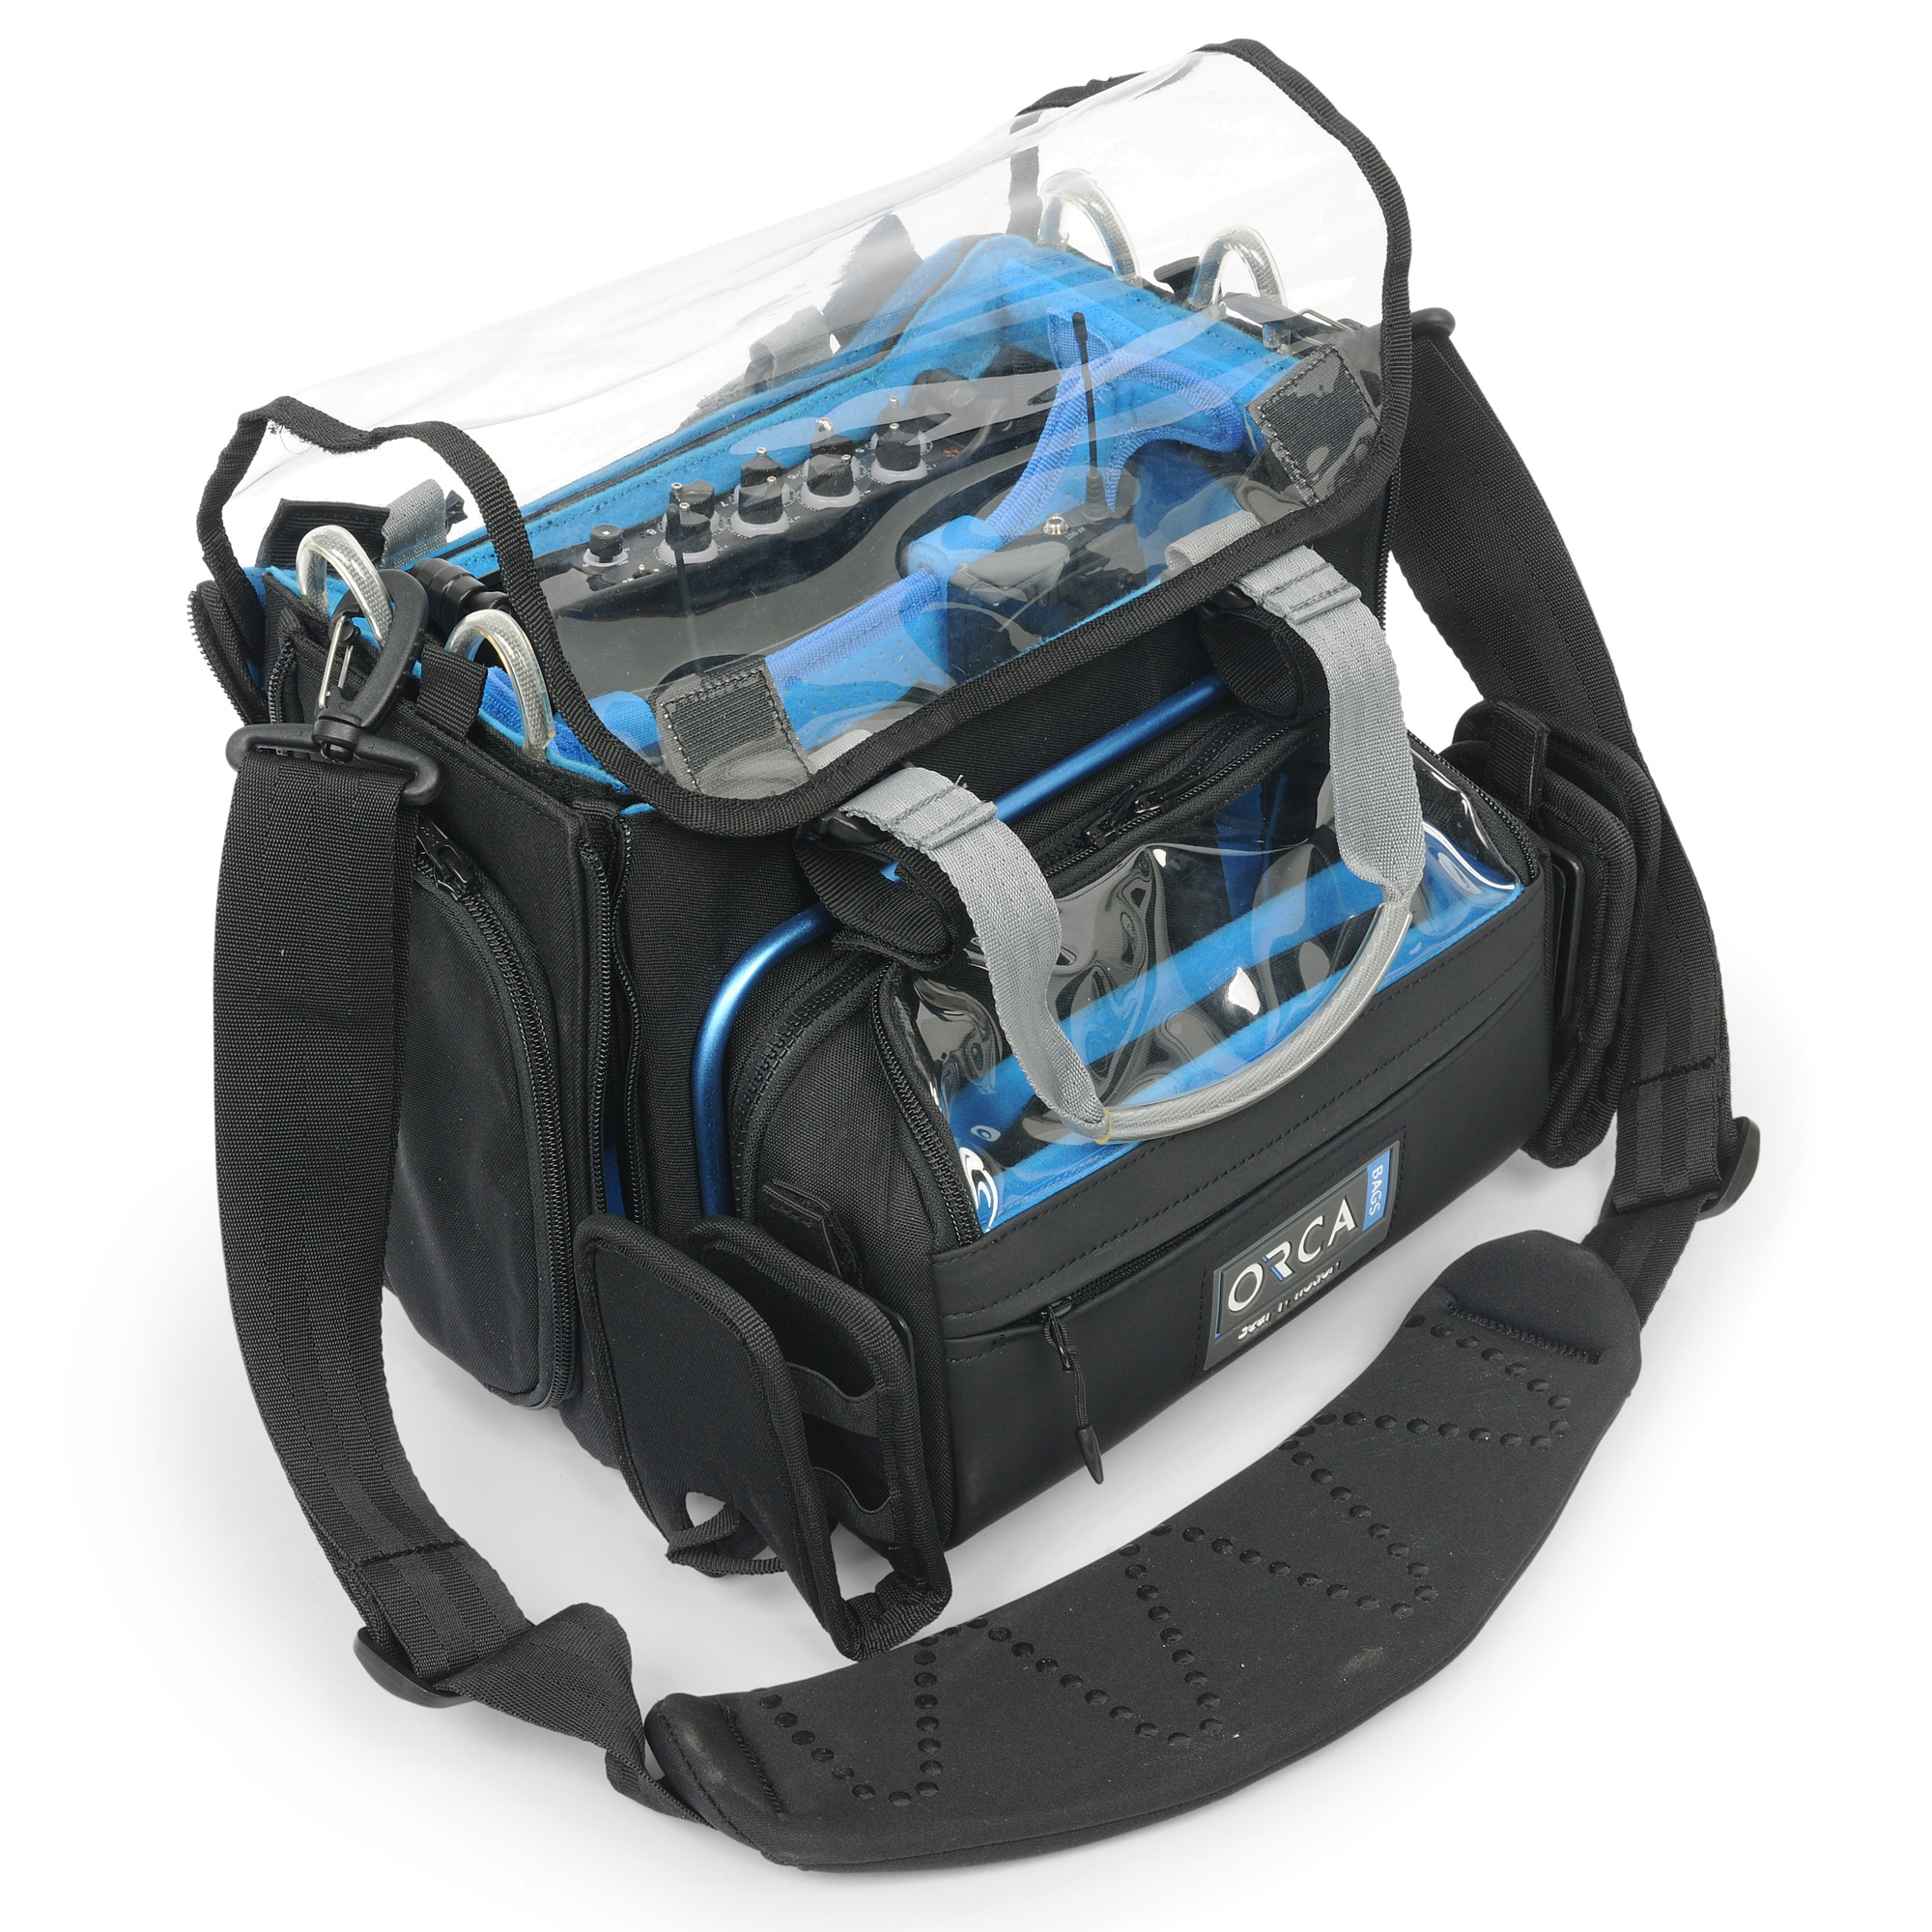 Orca bags - Gear in motion